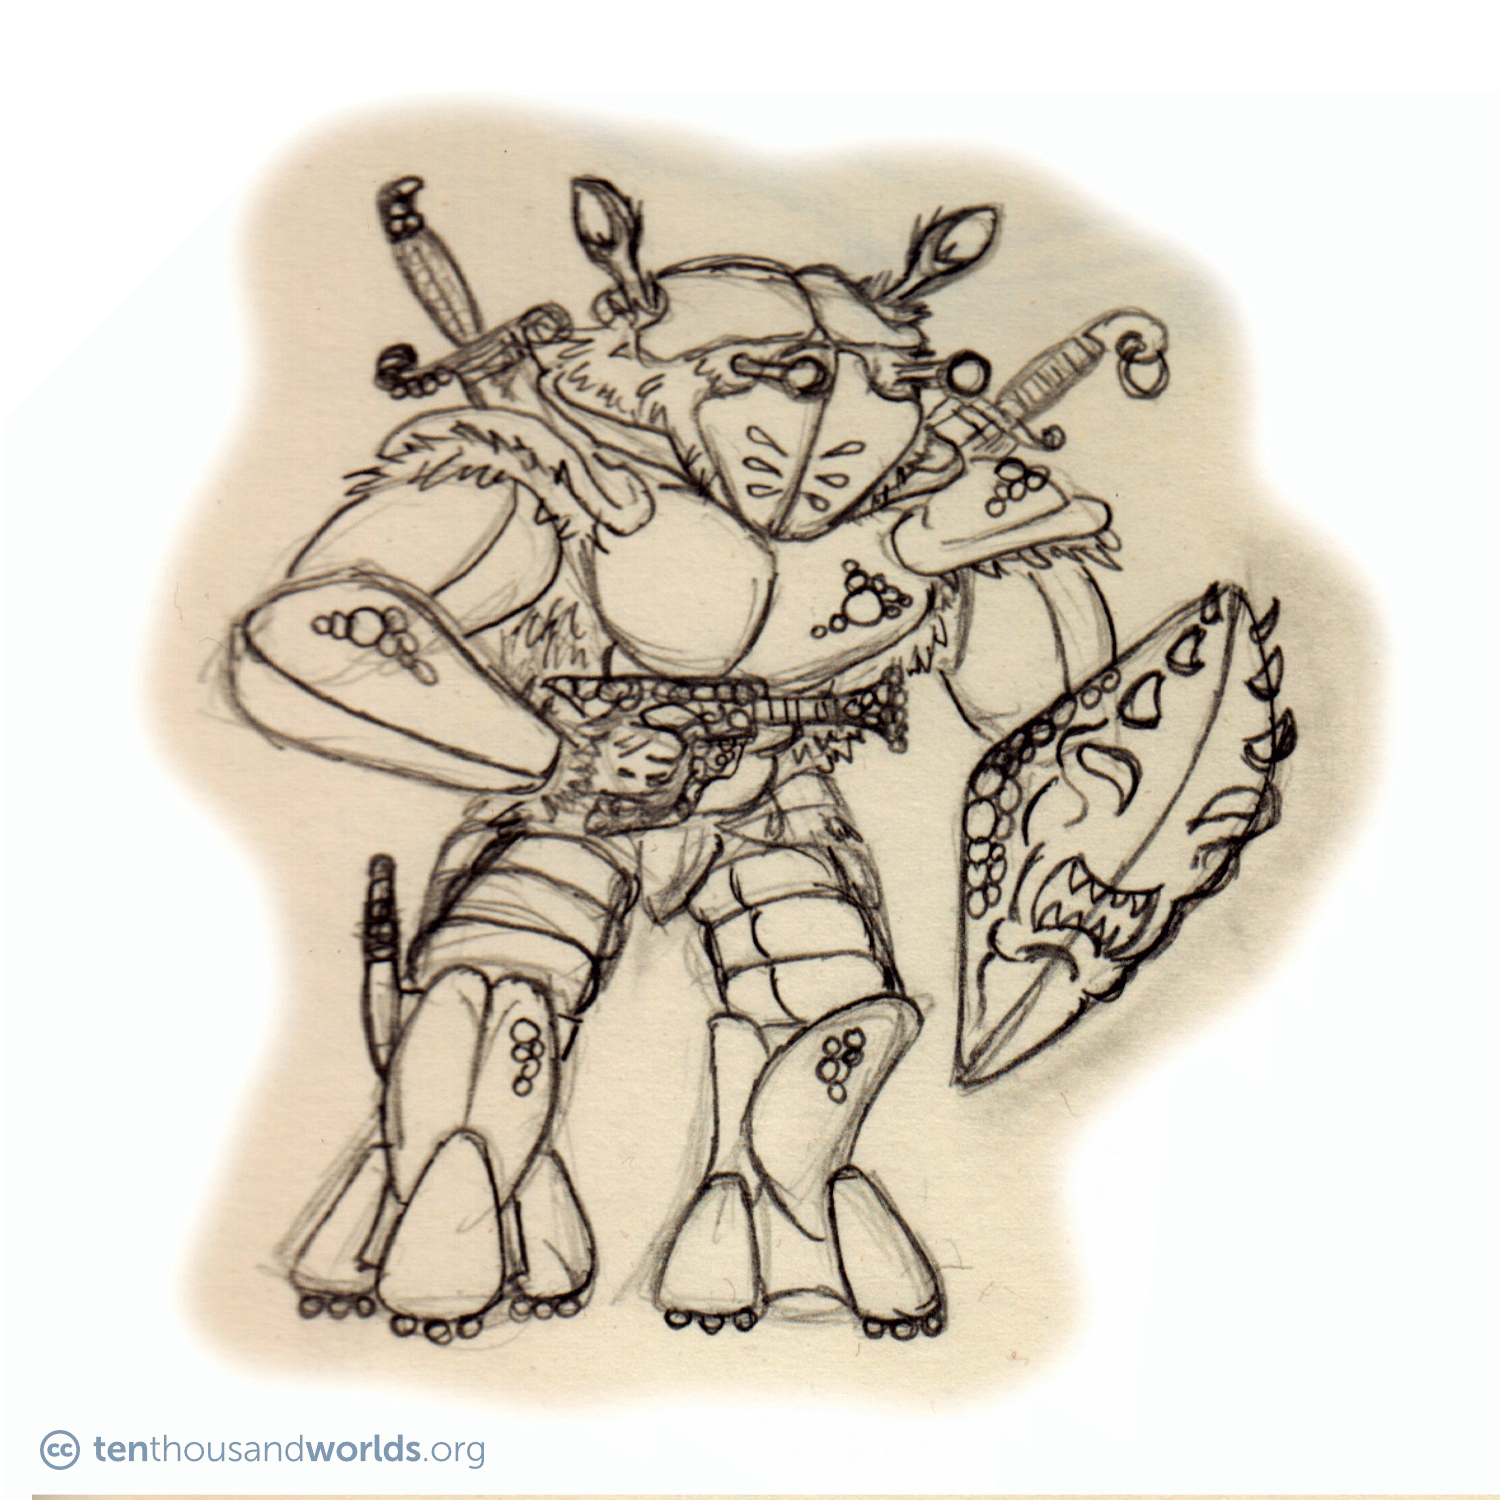 A pencil sketch of a squat, upright creature whose fur, twin eye-stalks, and pivoting spade-shaped ears poke out from between the plates of a crab-like suit of armor with a bubble texture. It carries a shield carved to resemble a screaming face, and bears multiple swords, a knife, and a pistol made from the same material as the armor.